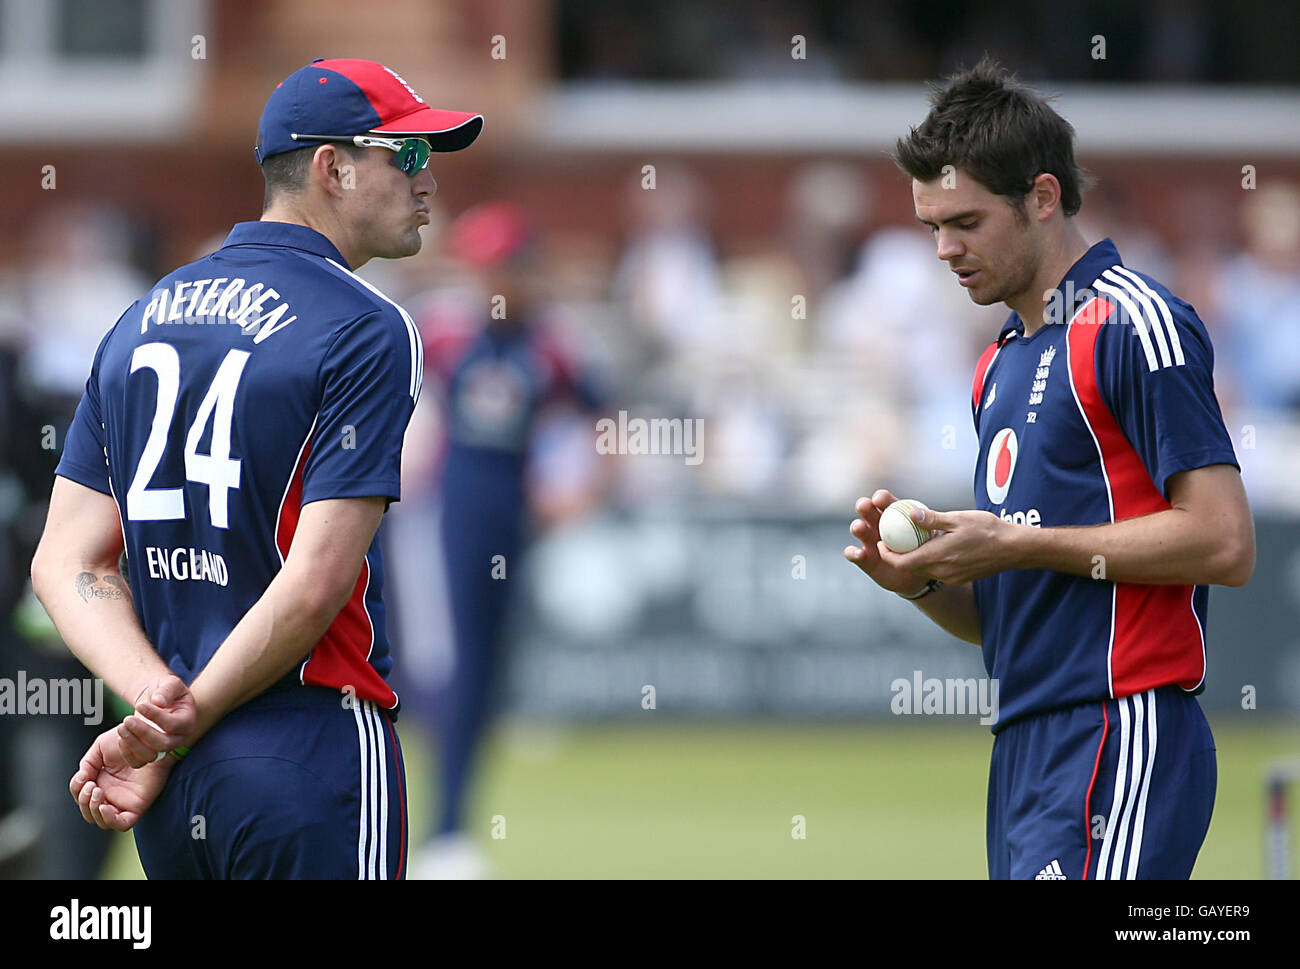 Cricket - NatWest Series - Fifth One Day International - England v New Zealand - Lord's. England Captain Kevin Pietersen (l) chats with his bowler James Anderson during the NatWest Series One Day International at Lord's, London. Stock Photo